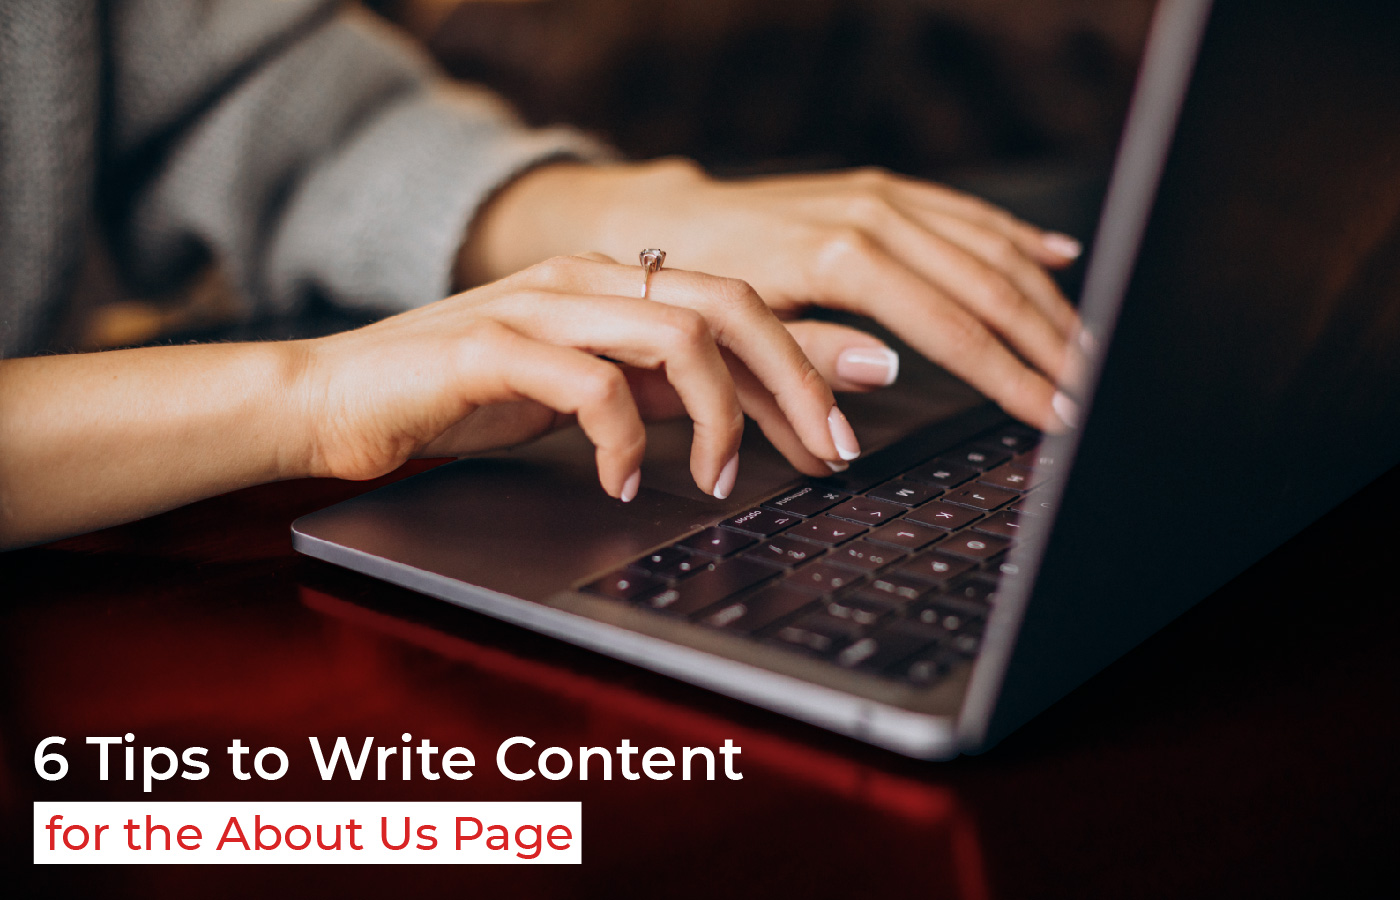 6 Tips to Write Content for the About Us Page